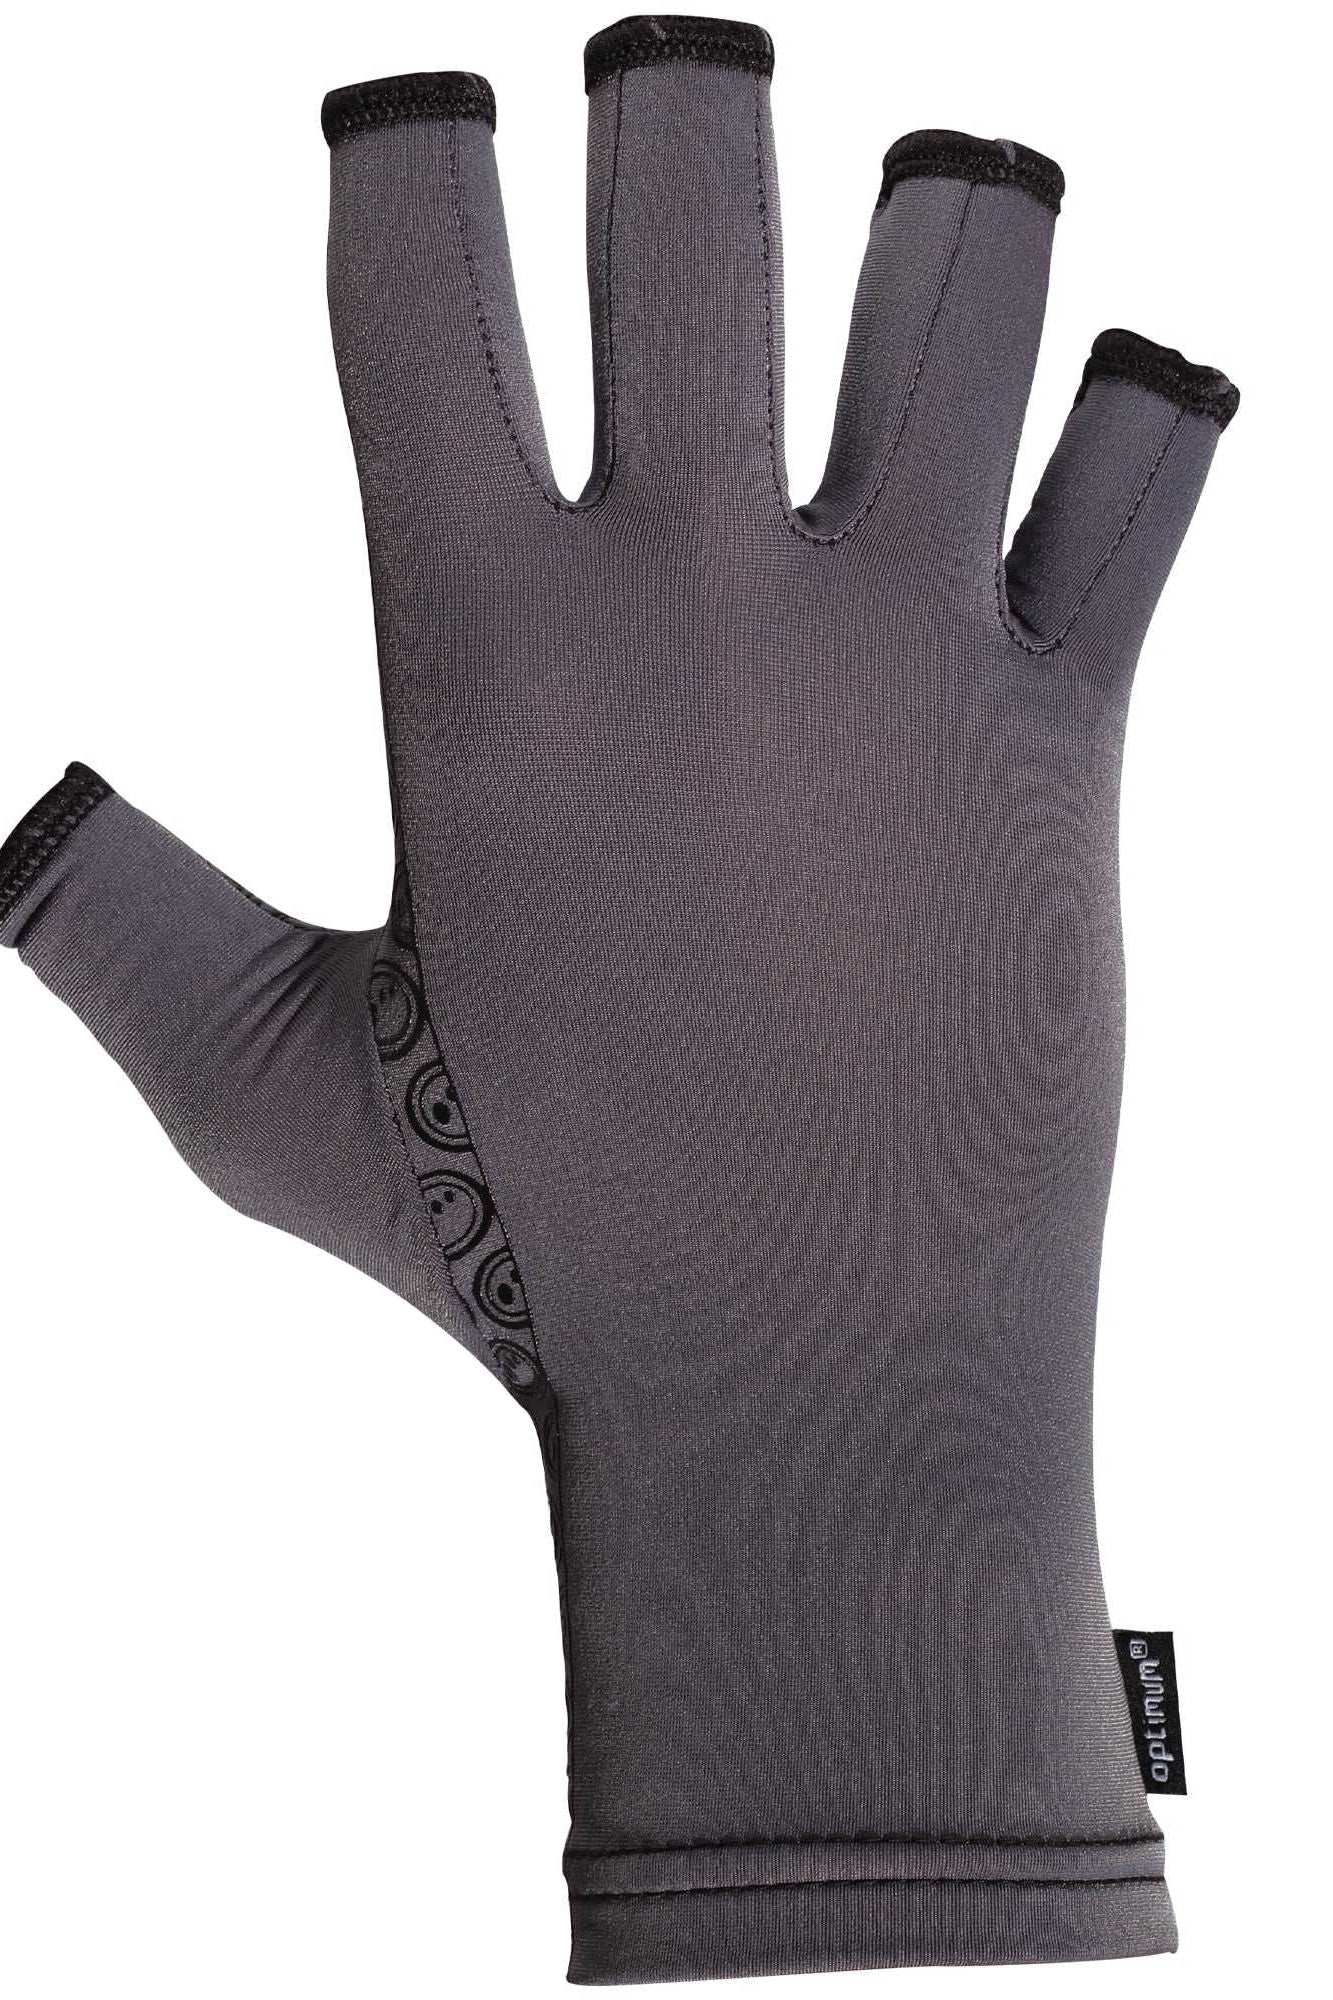 Arthritis Compression Therapy Gloves Soft Hand Protection - Optimum